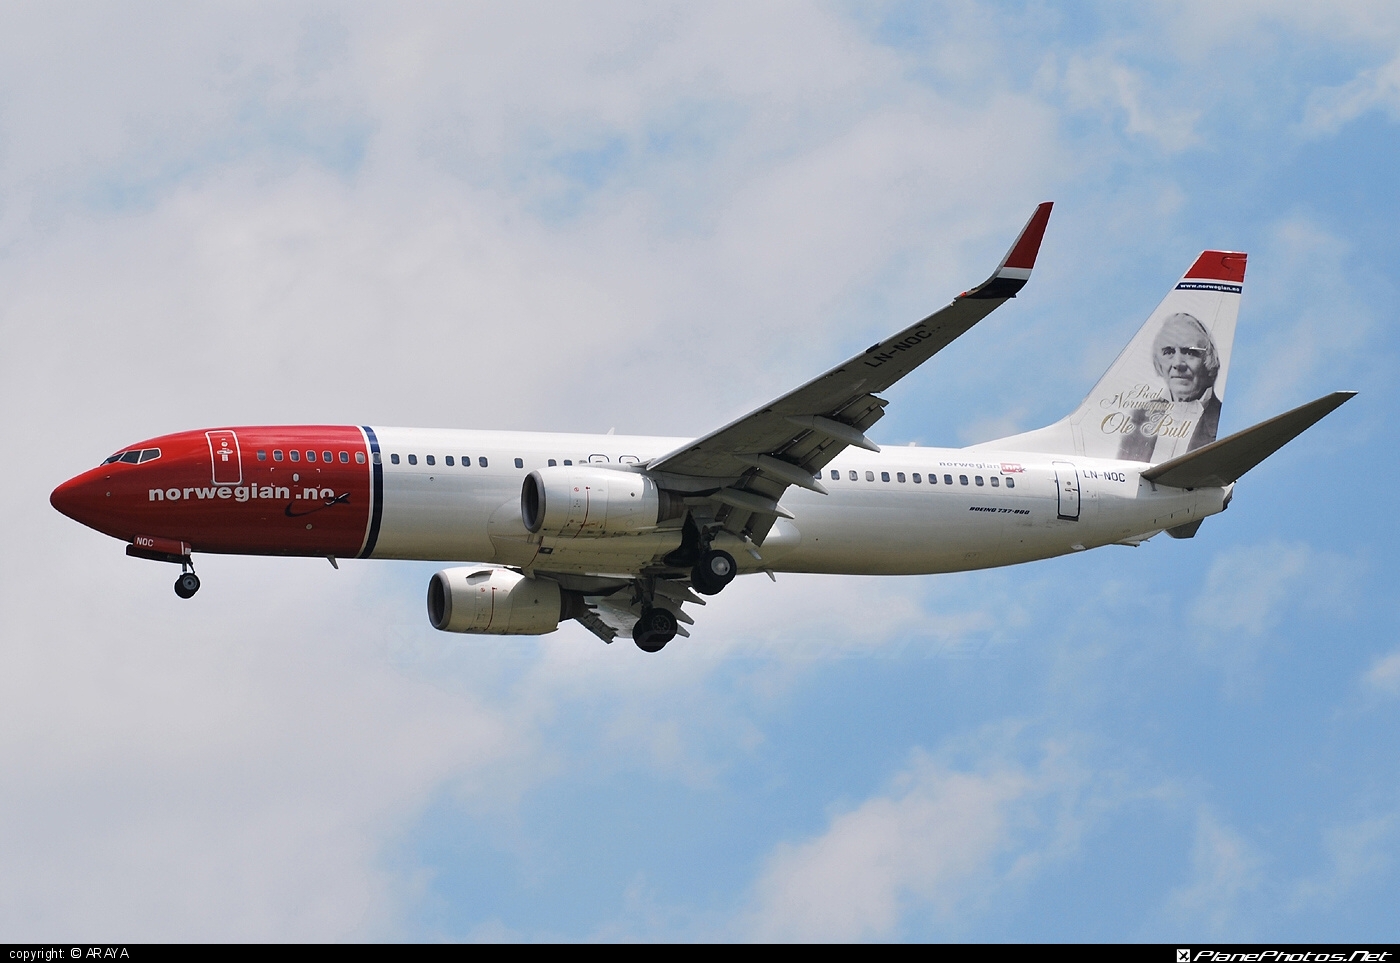 Boeing 737-800 - LN-NOC operated by Norwegian Air Shuttle #b737 #b737nextgen #b737ng #boeing #boeing737 #norwegian #norwegianair #norwegianairshuttle